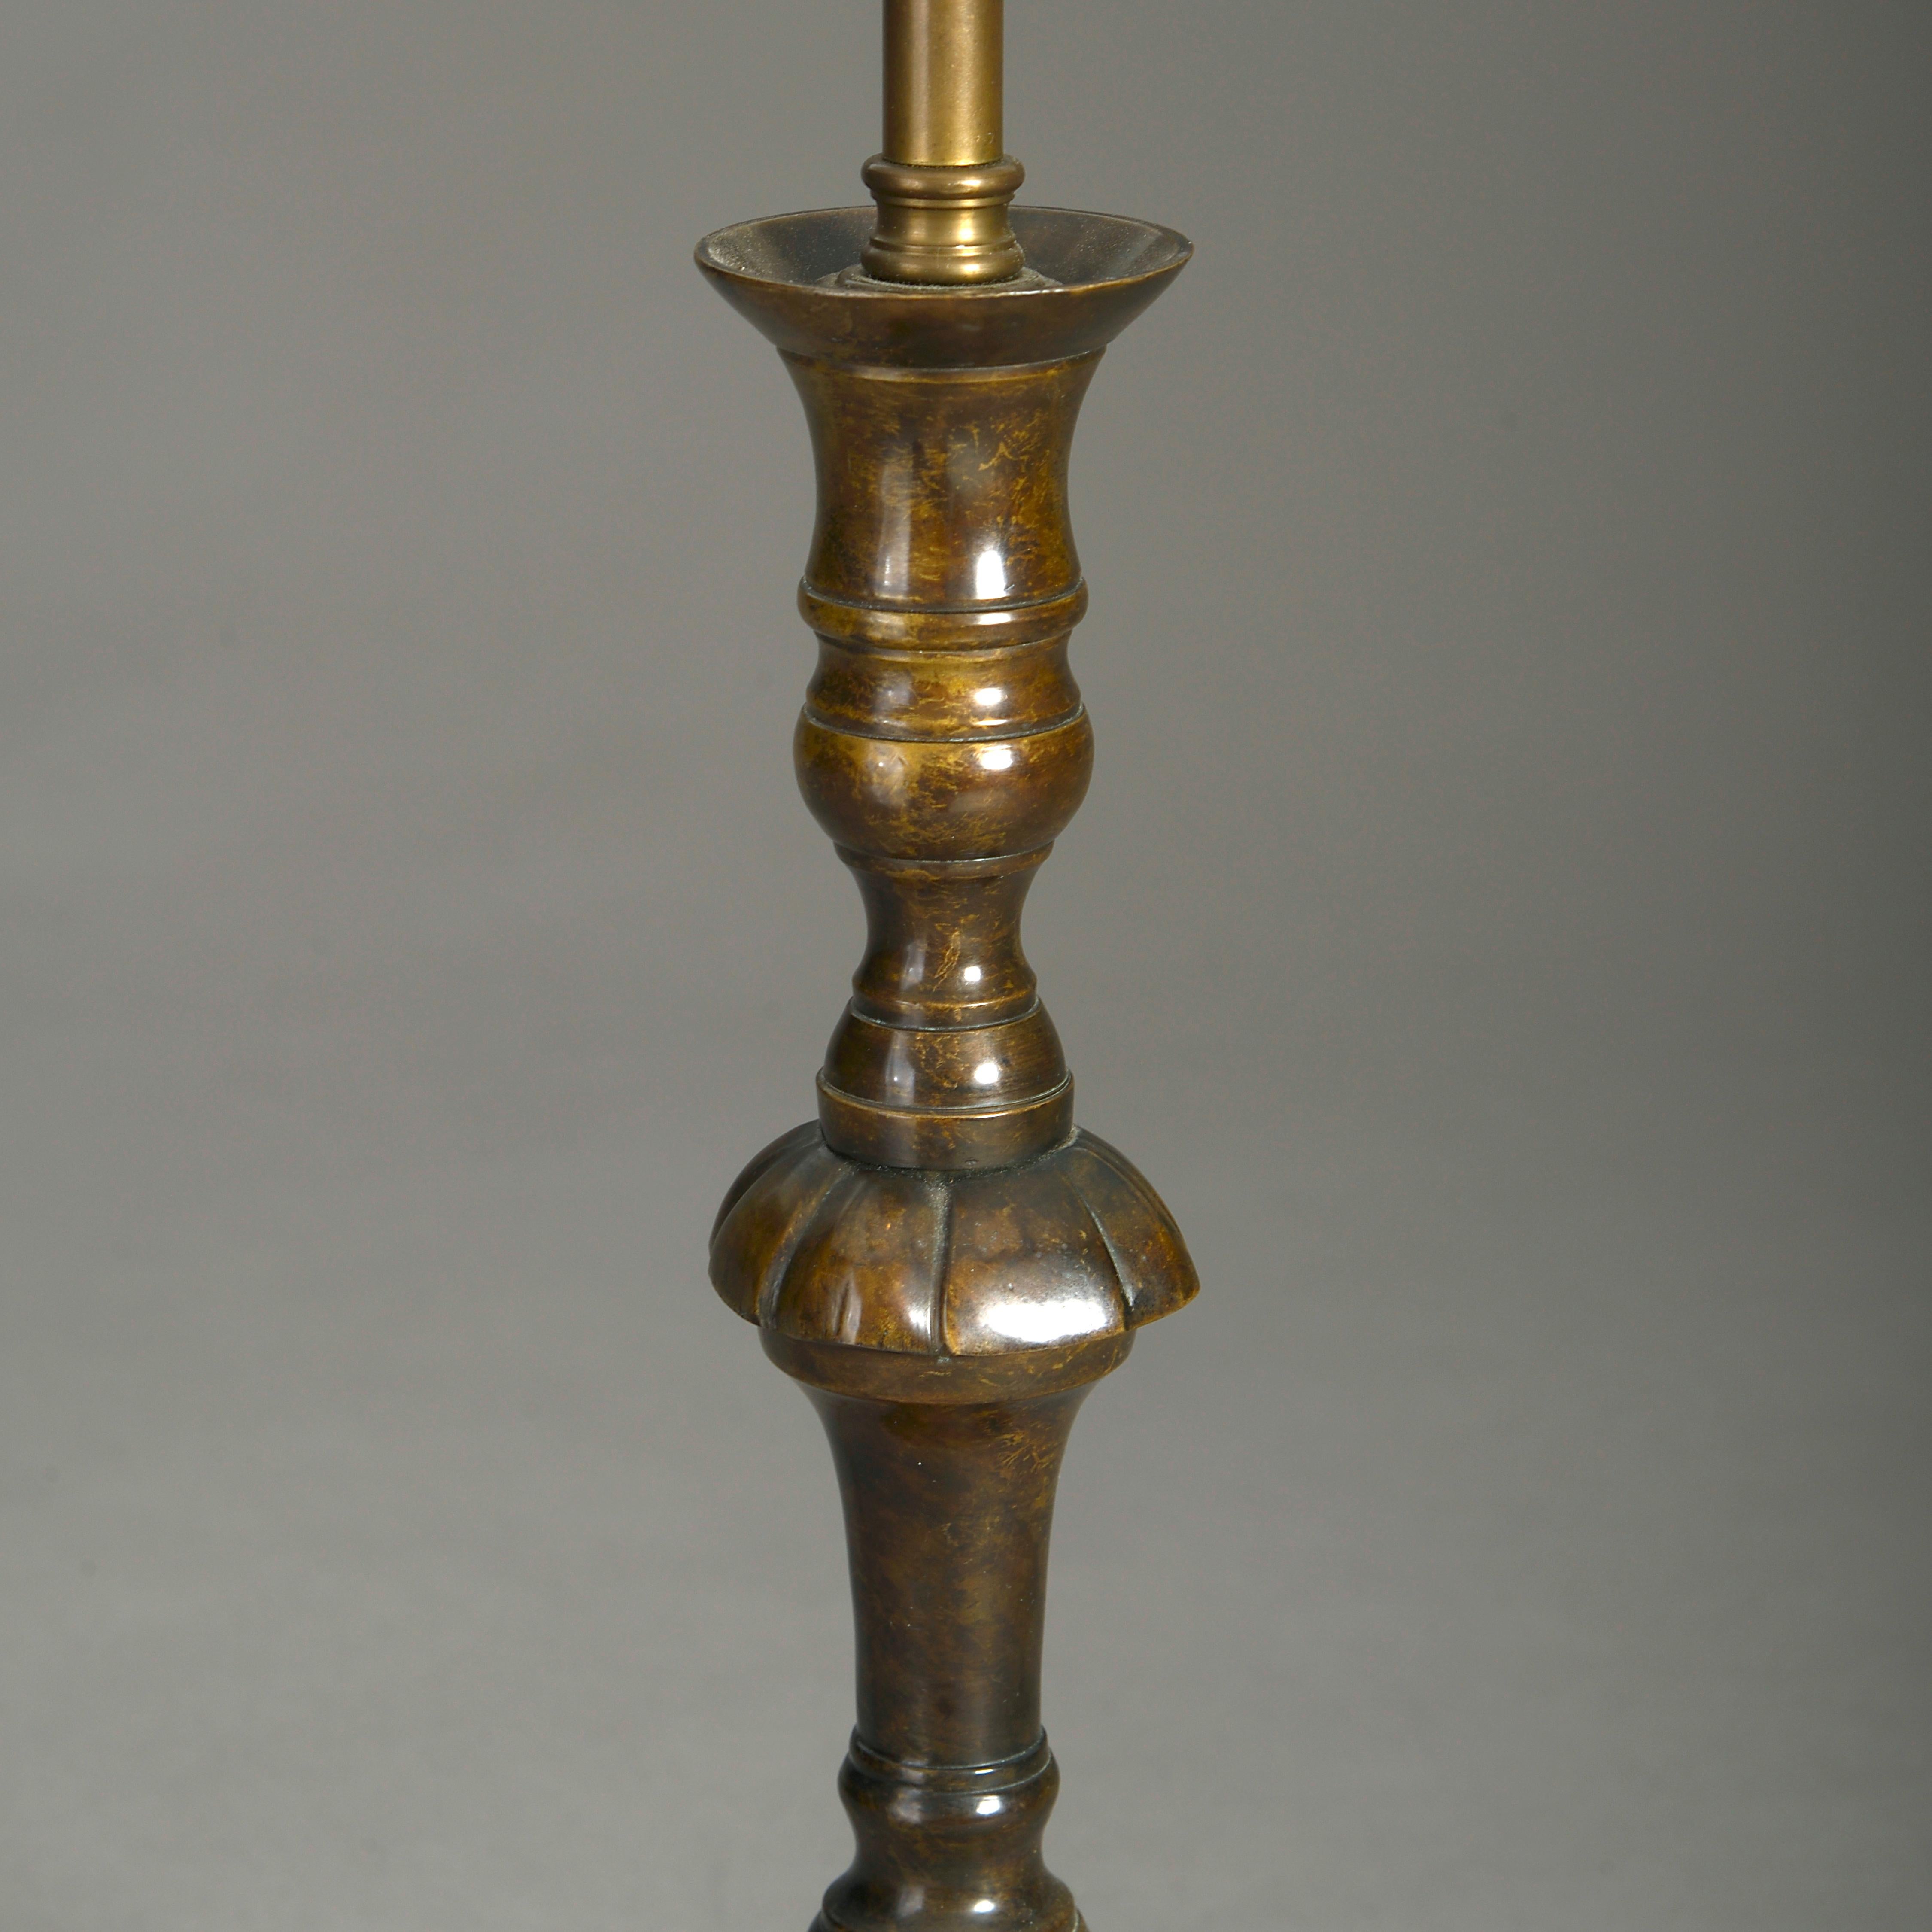 Baroque Revival Pair of Georgian Style Bronzed Candlestick Lamps